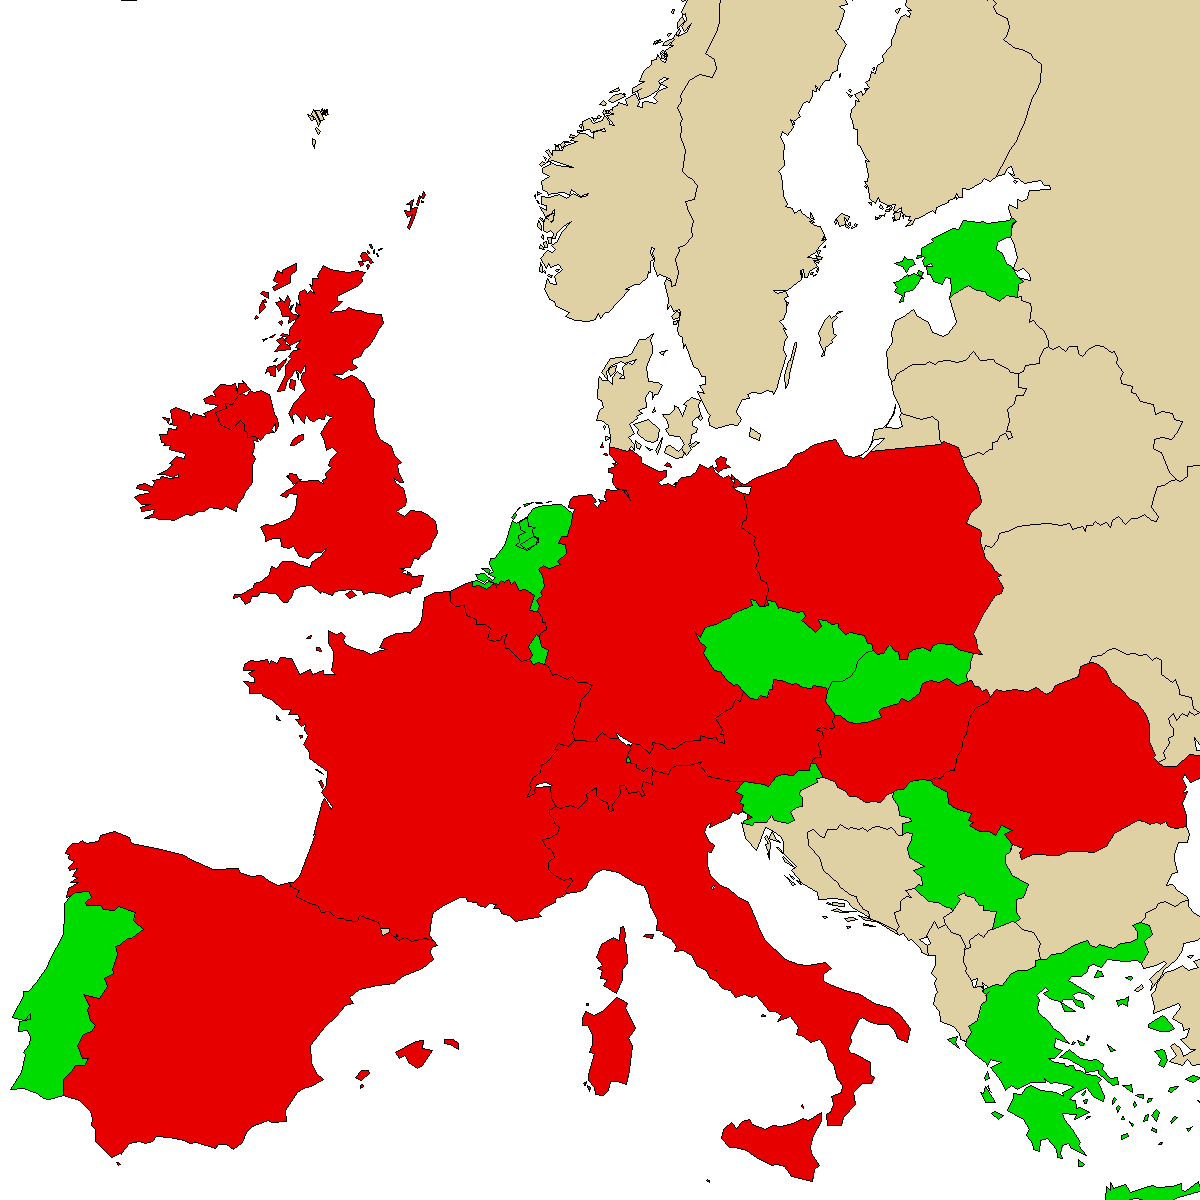 legal info map for our product 3CC, green are countries where we found no ban, red with ban, grey is unknown